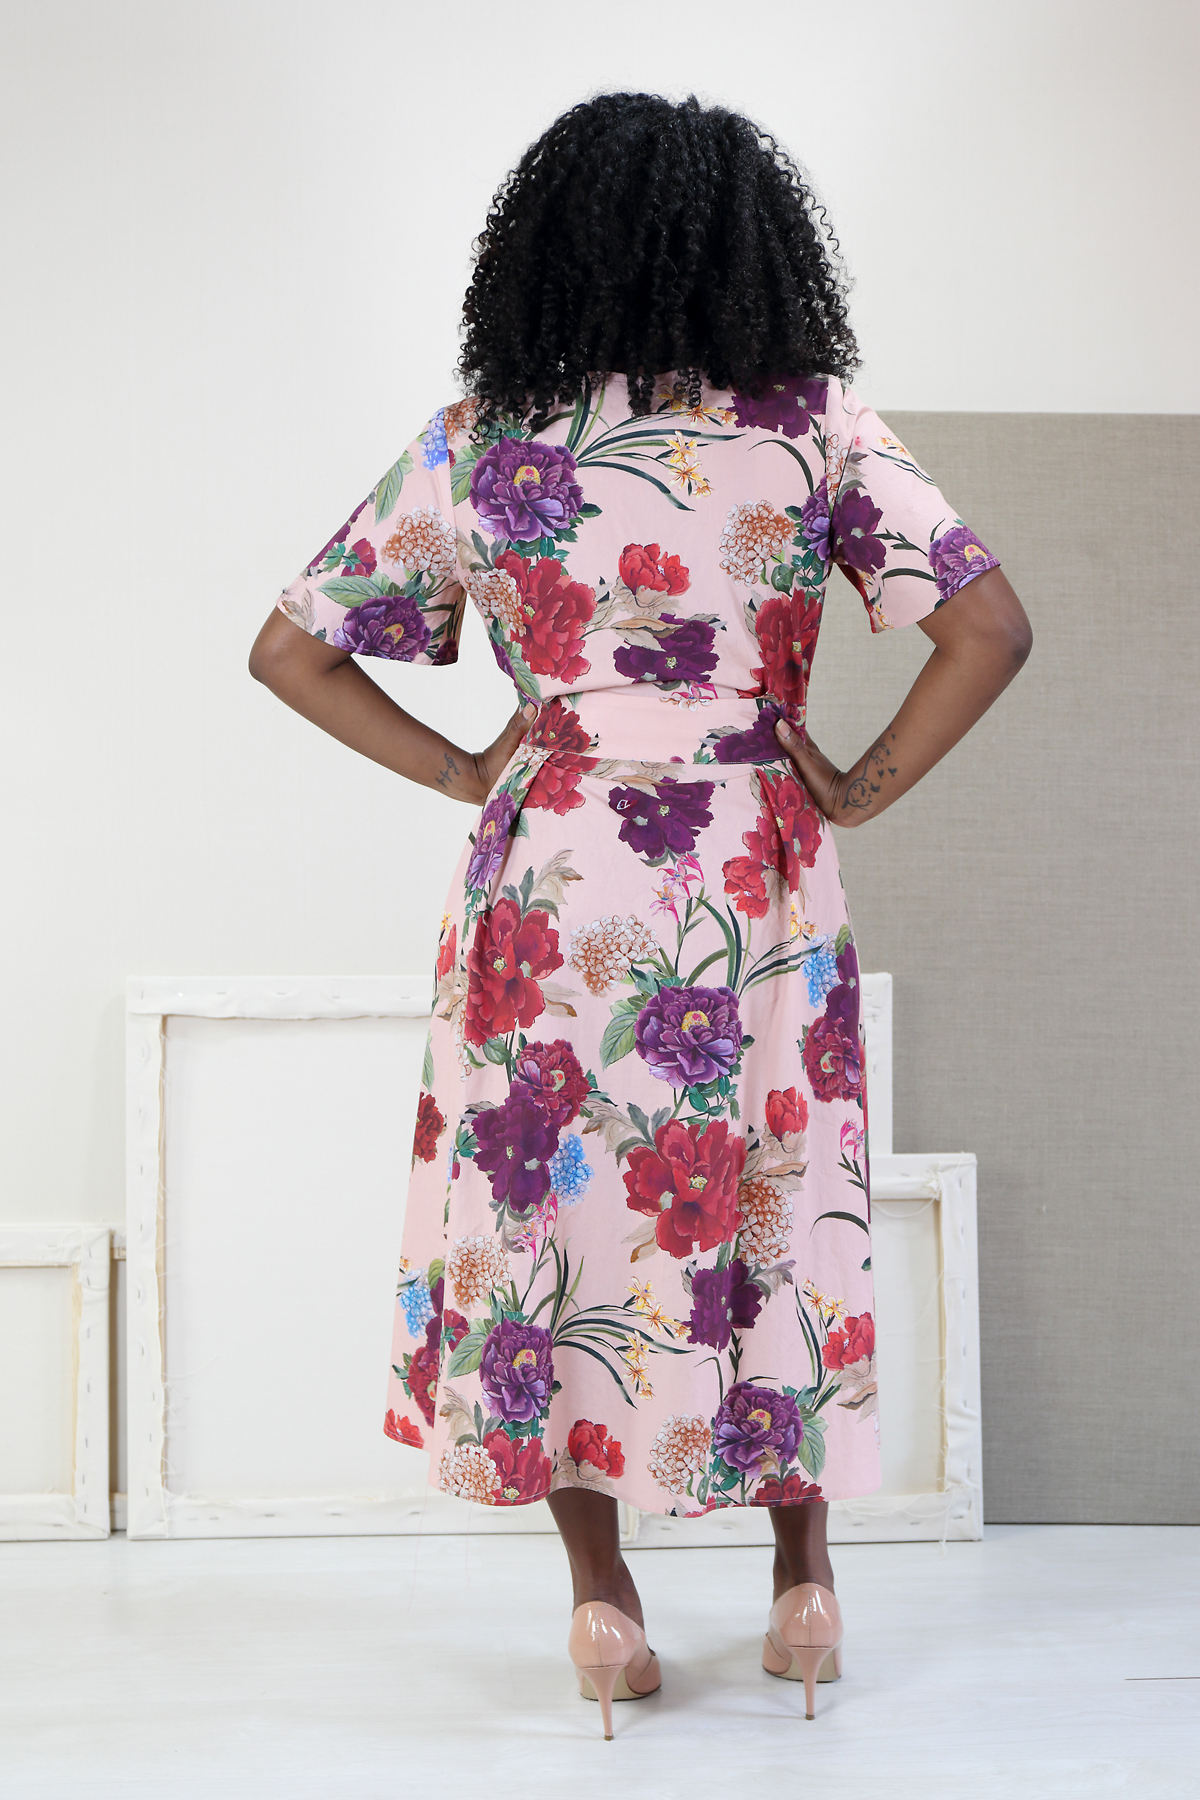 Introducing the Saint-Germain Wrap Dress Sewing Pattern | Blog | Oliver + S